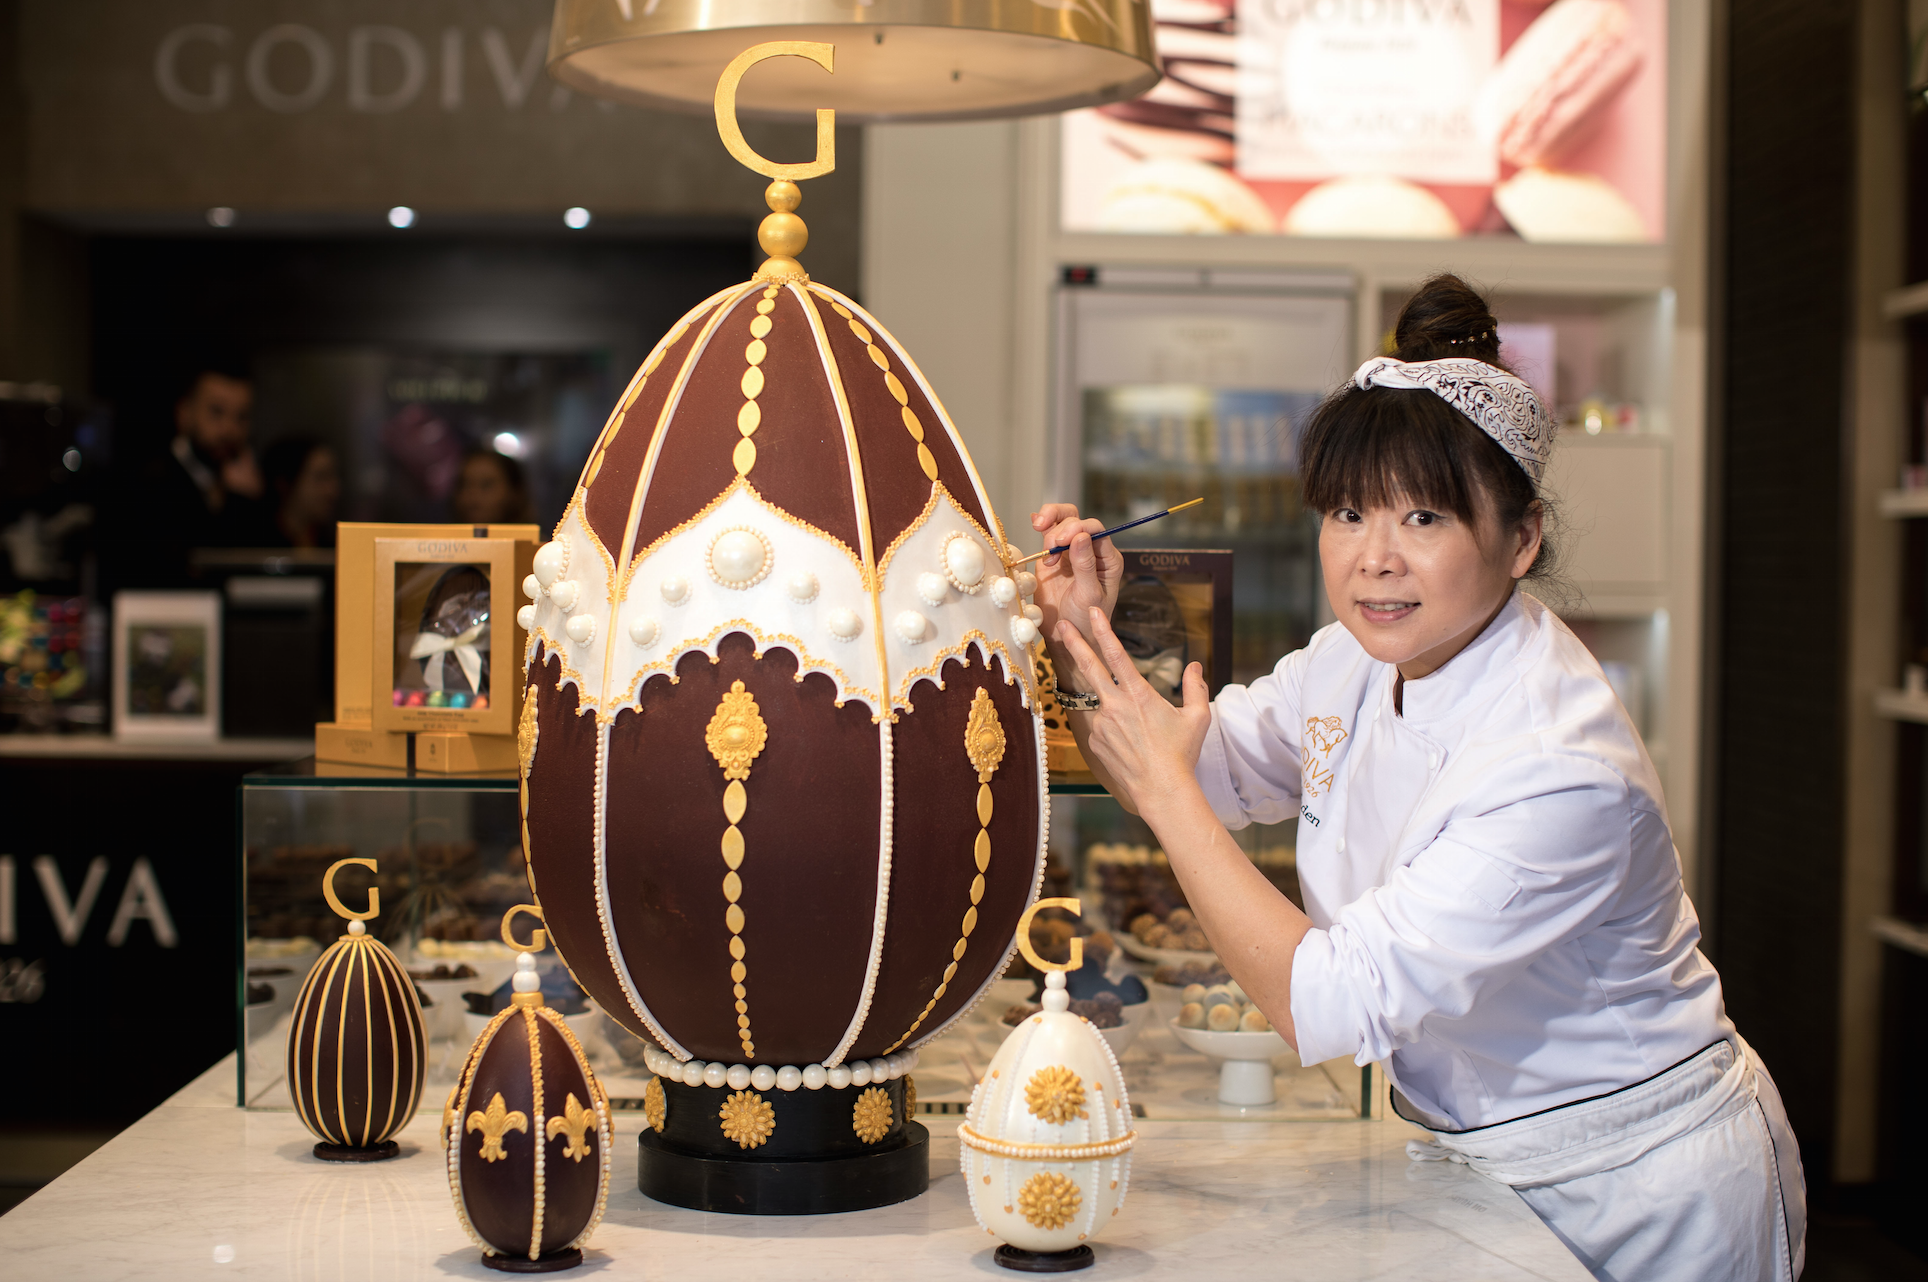 Showstopping creations: Cherish with the Godiva Atelier and Artesian eggs